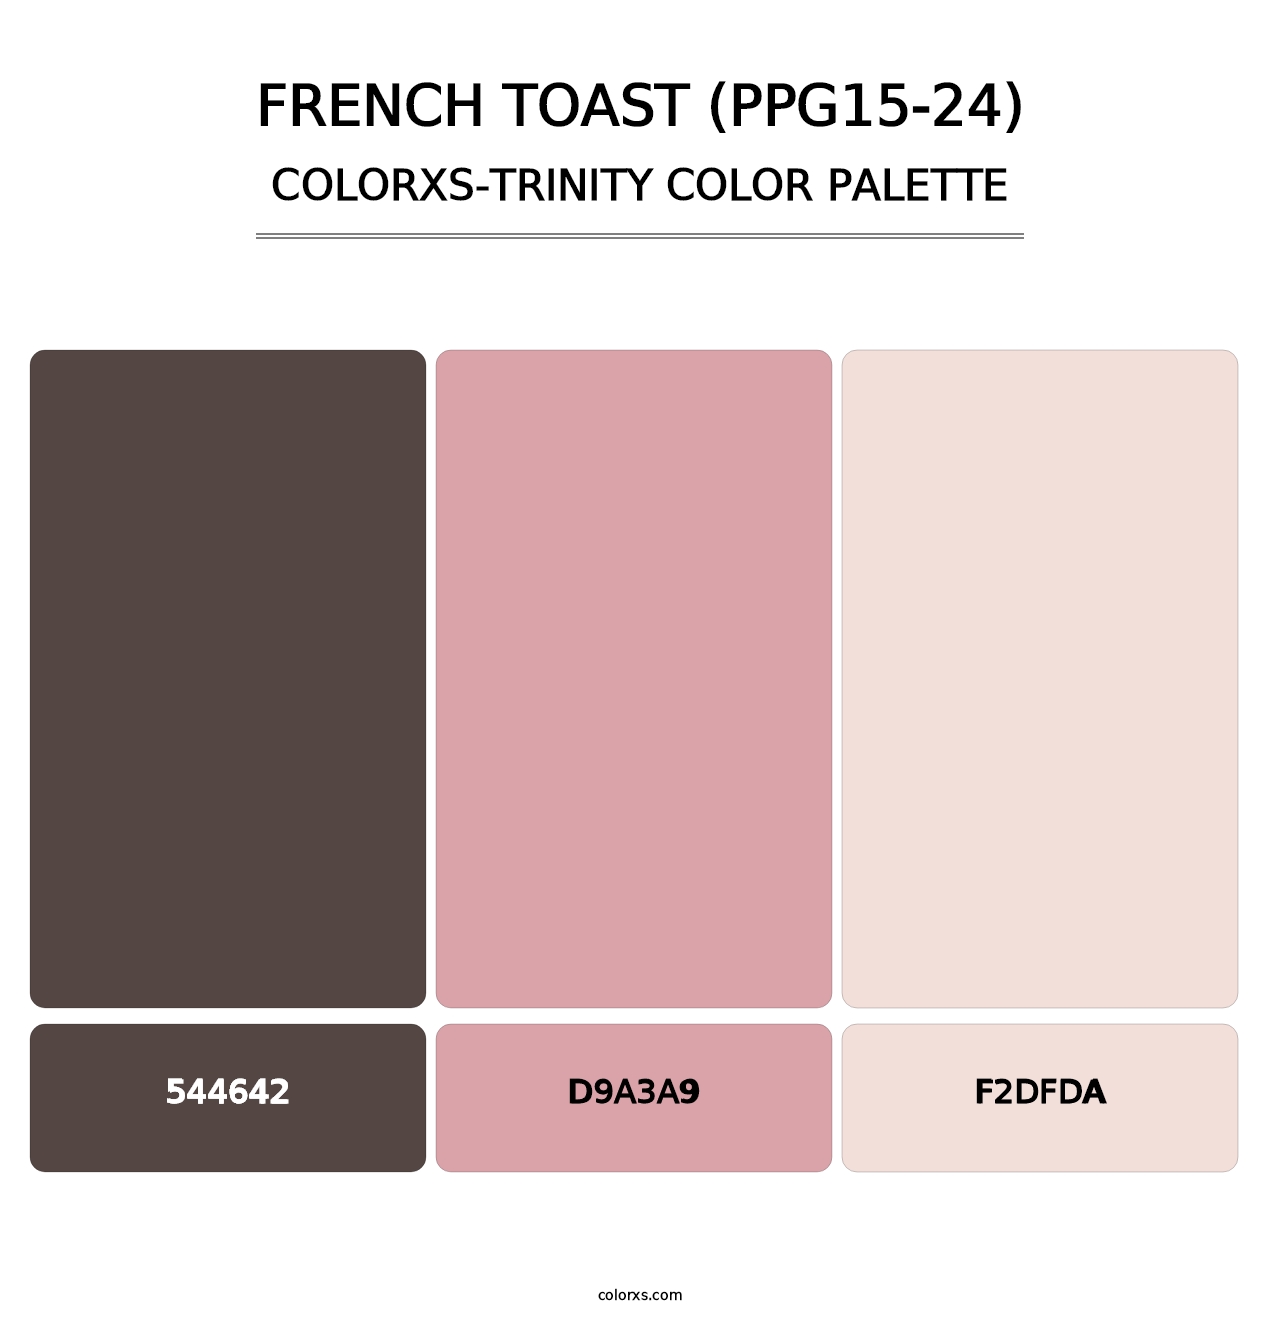 French Toast (PPG15-24) - Colorxs Trinity Palette